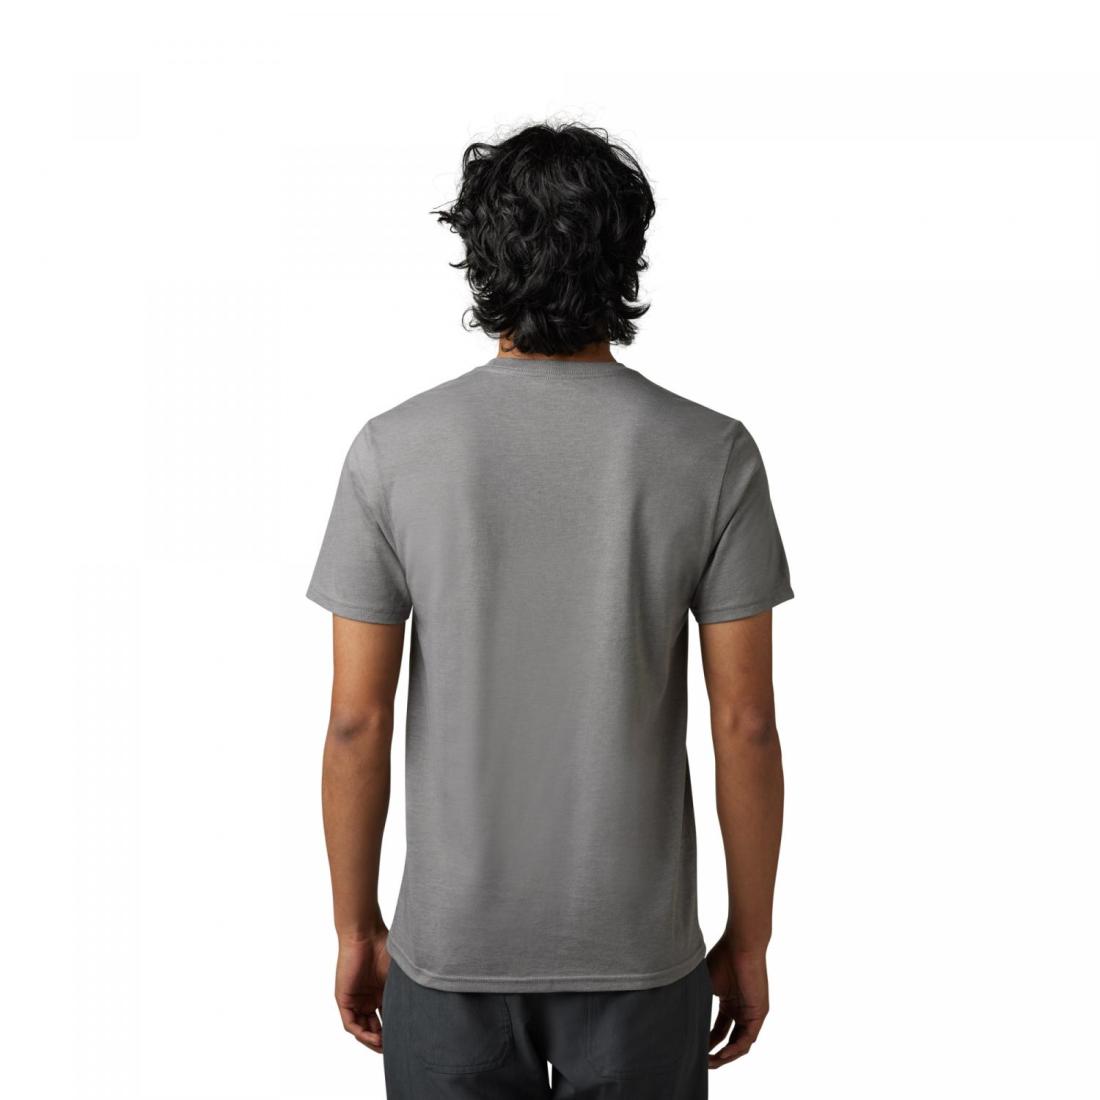 Absolute Ss Prem Tee Heather Graphite